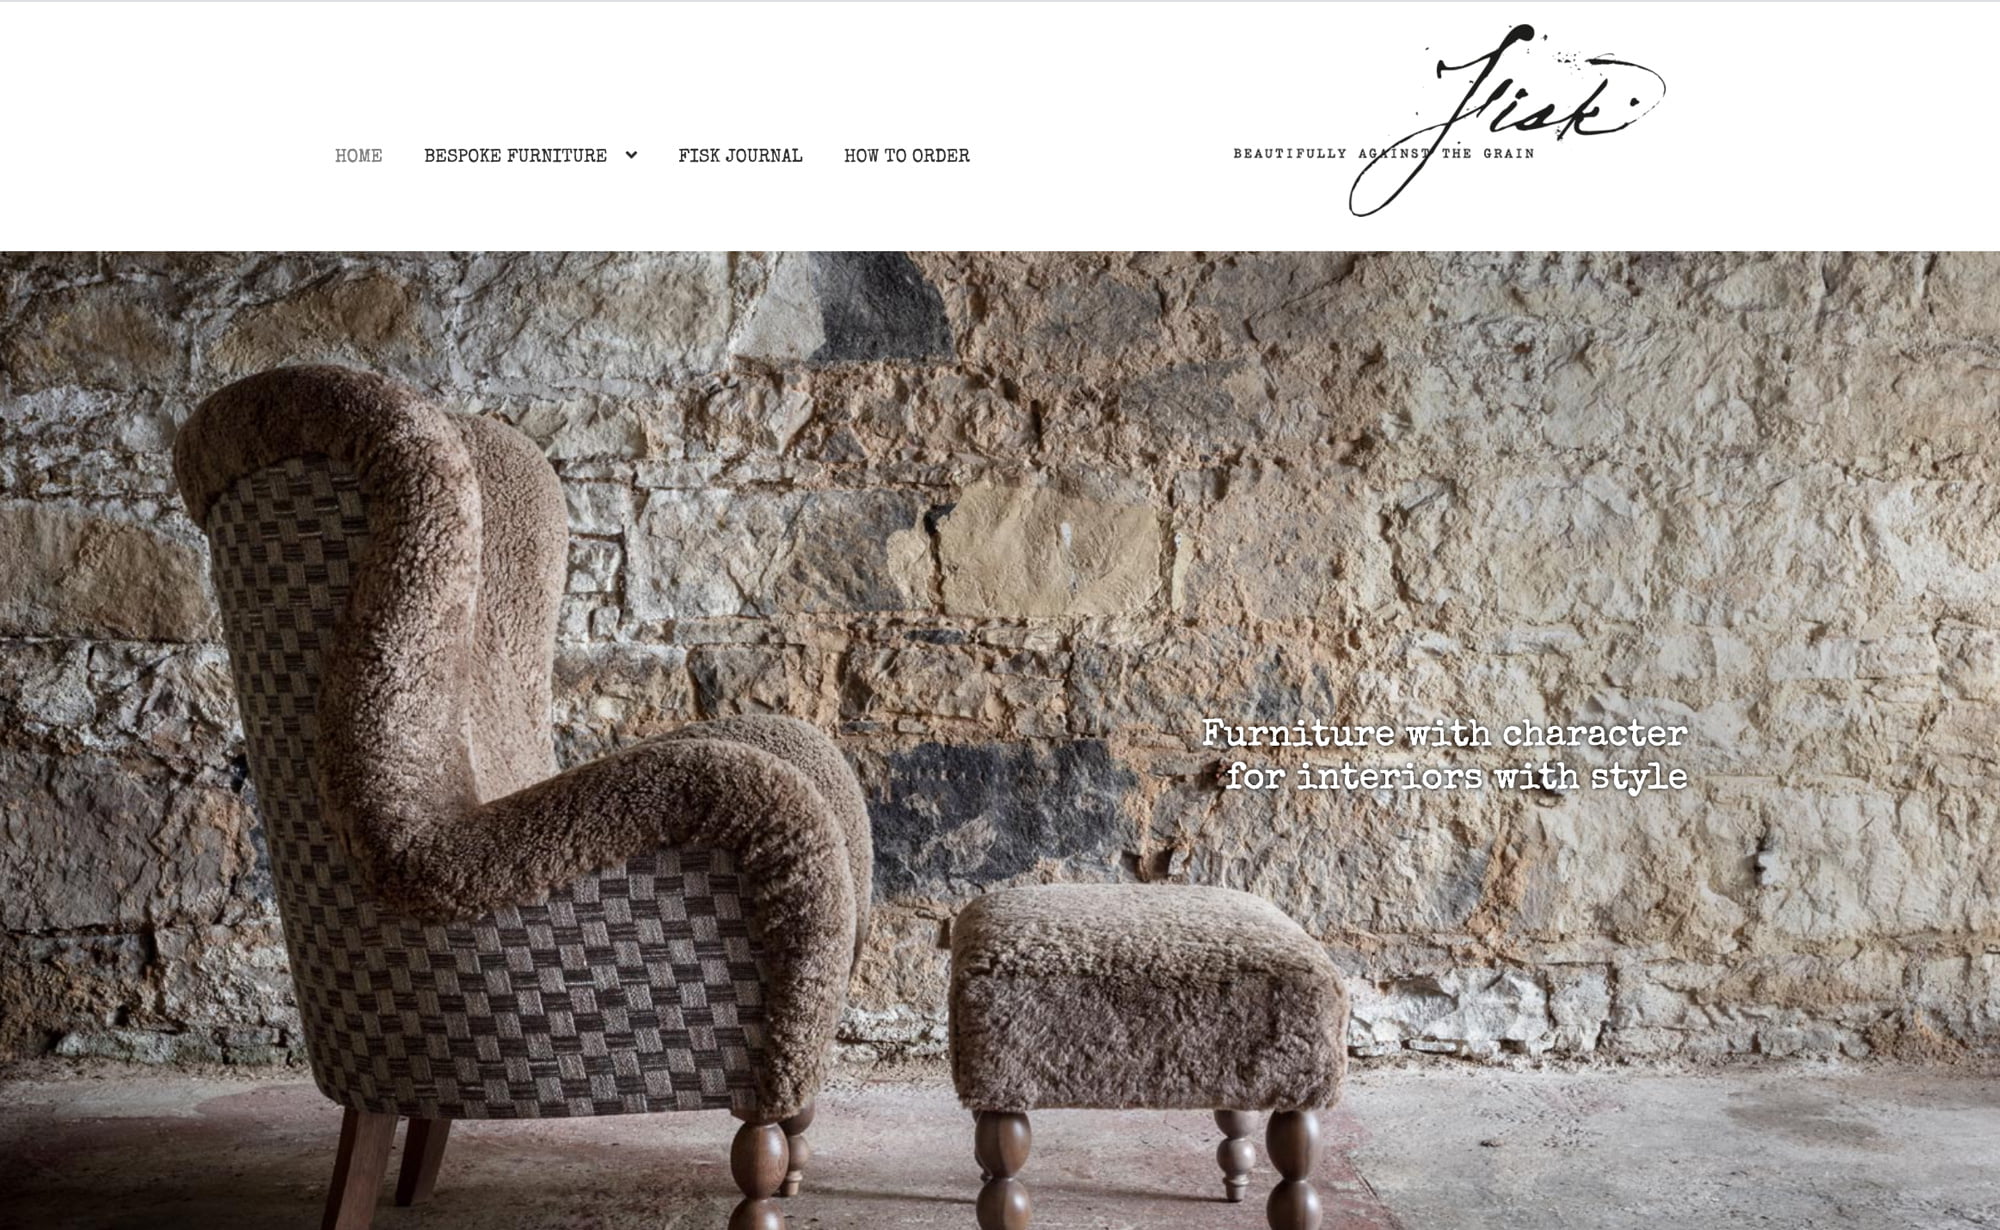 Fisk - Furniture with character for interiors with style